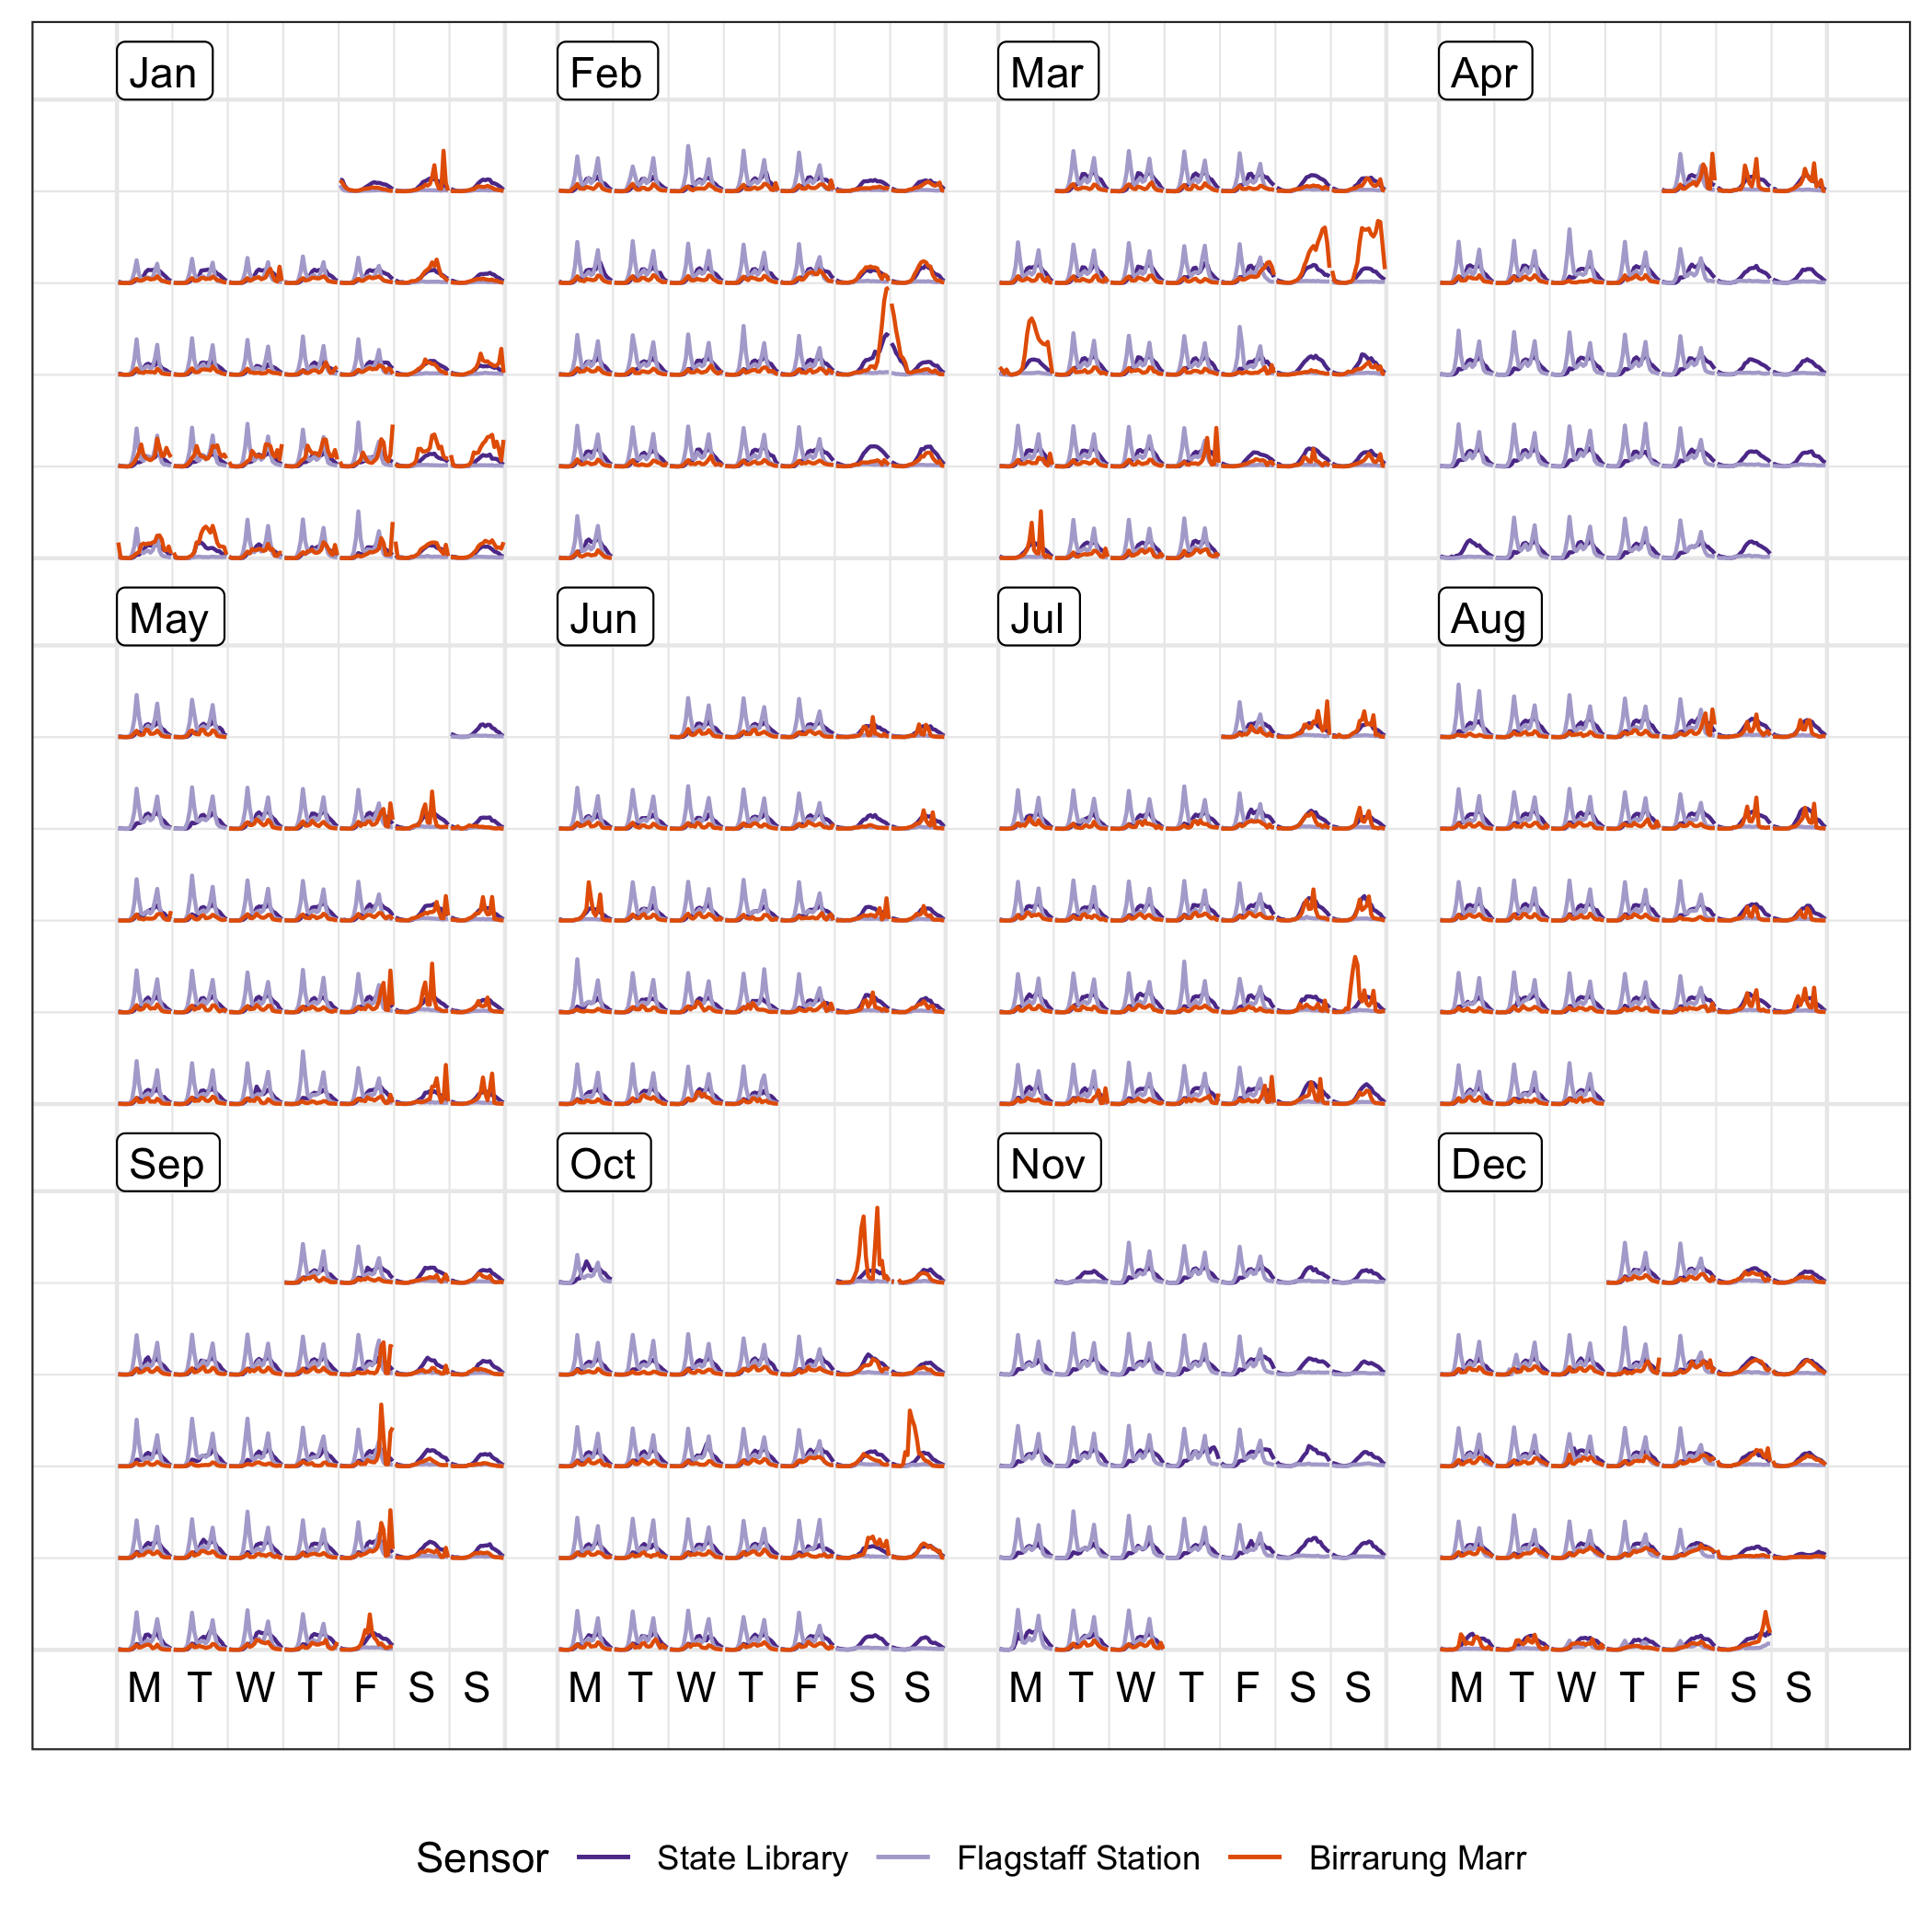 Overlaying line graphs of the three sensors in the monthly calendar, to enable a direct comparison of the counts at three locations. They have very different traffic patterns. Birrarung Marr tends to attract large numbers of pedestrians for special events typically held on weekends, contrasting to the bimodal massive peaks showing commuting traffic at Flagstaff Station.